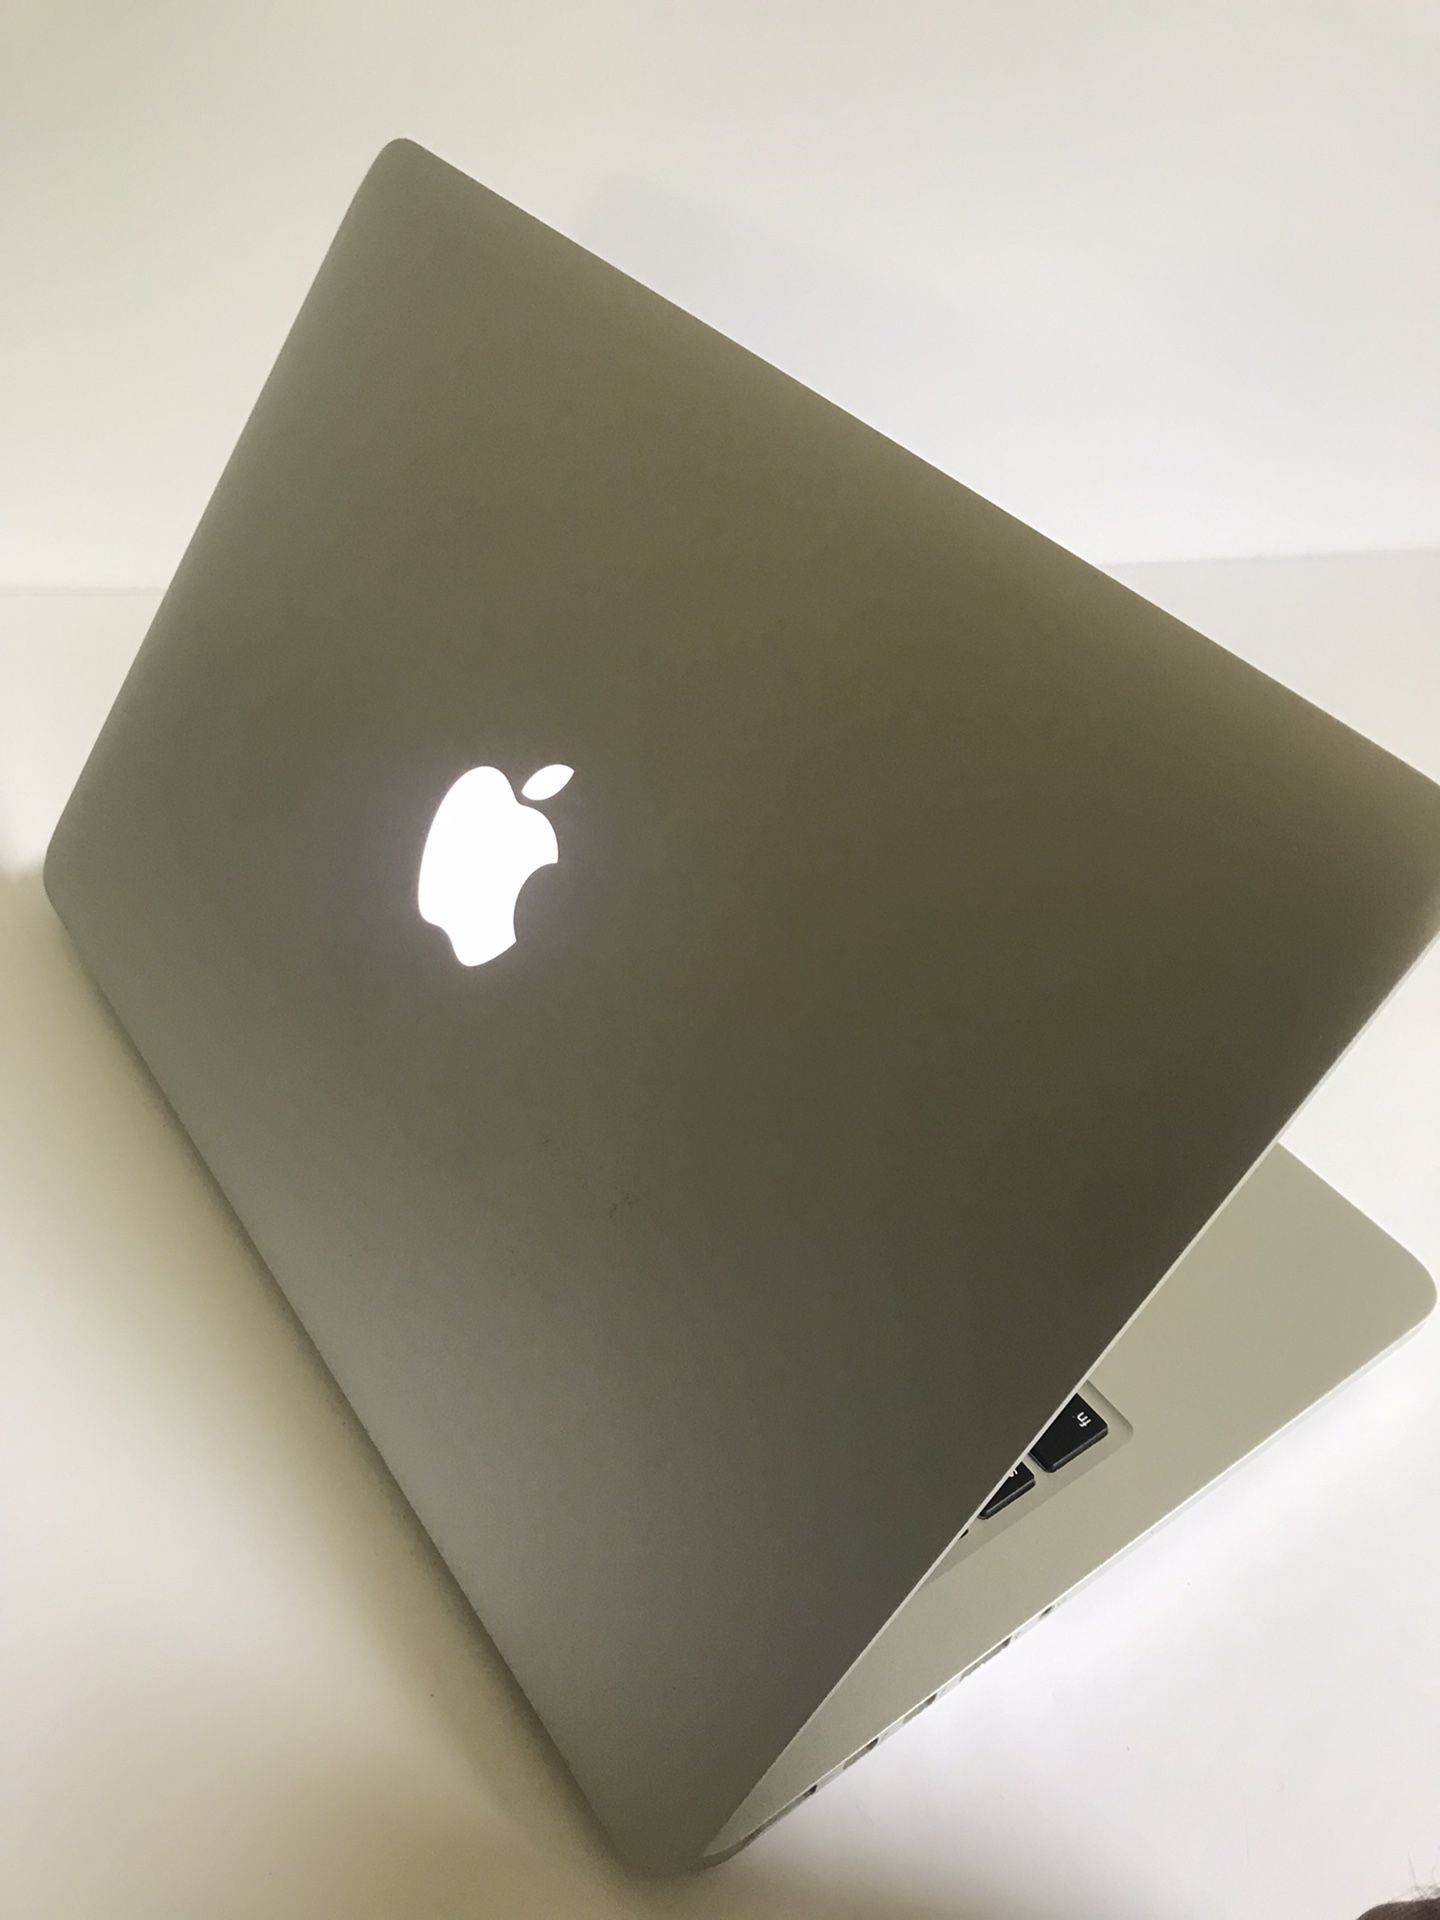 2014 MacBook Pro 13 inch, 256GB SSD, 8GB RAM, Excellent Condition , Battery lasts Long Hours